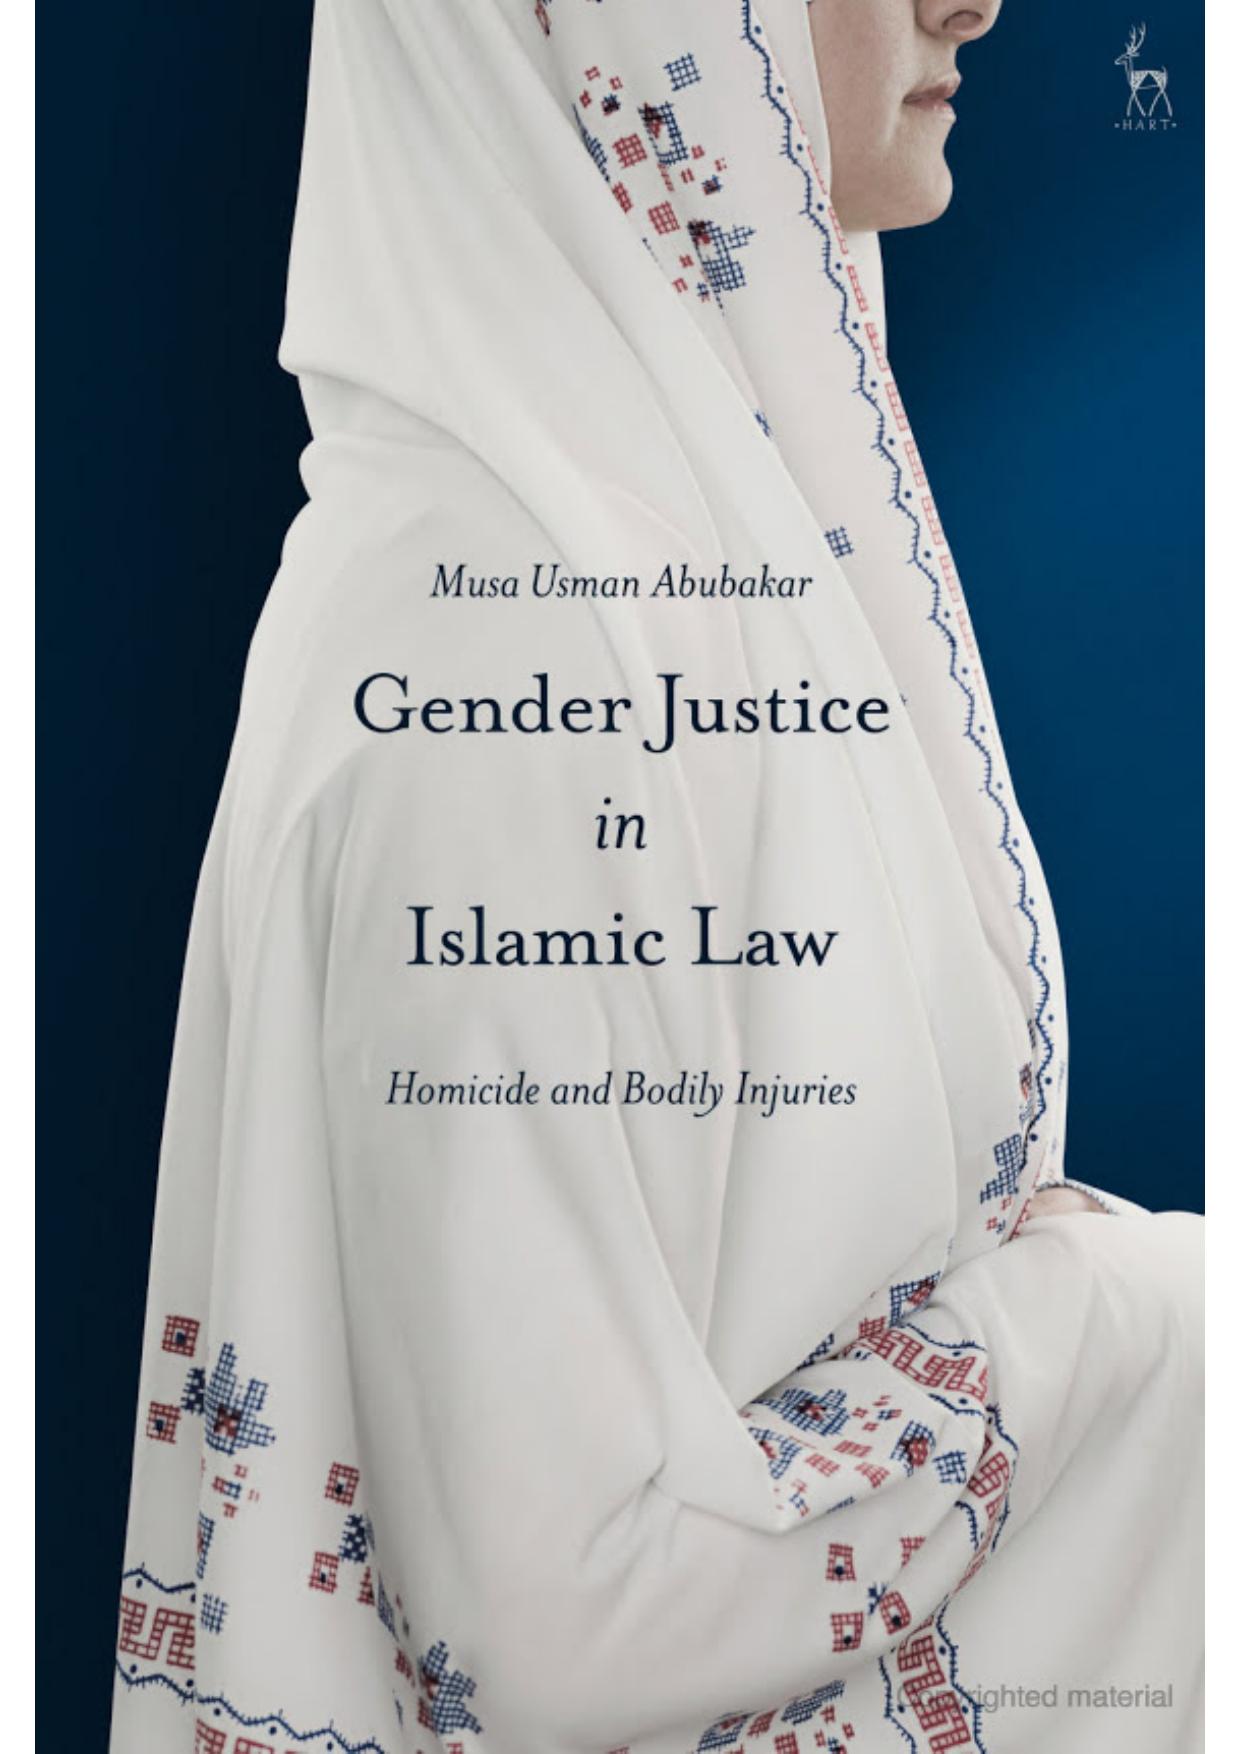 Gender Justice in Islamic Law  Homicide and Bodily Injuries 2018